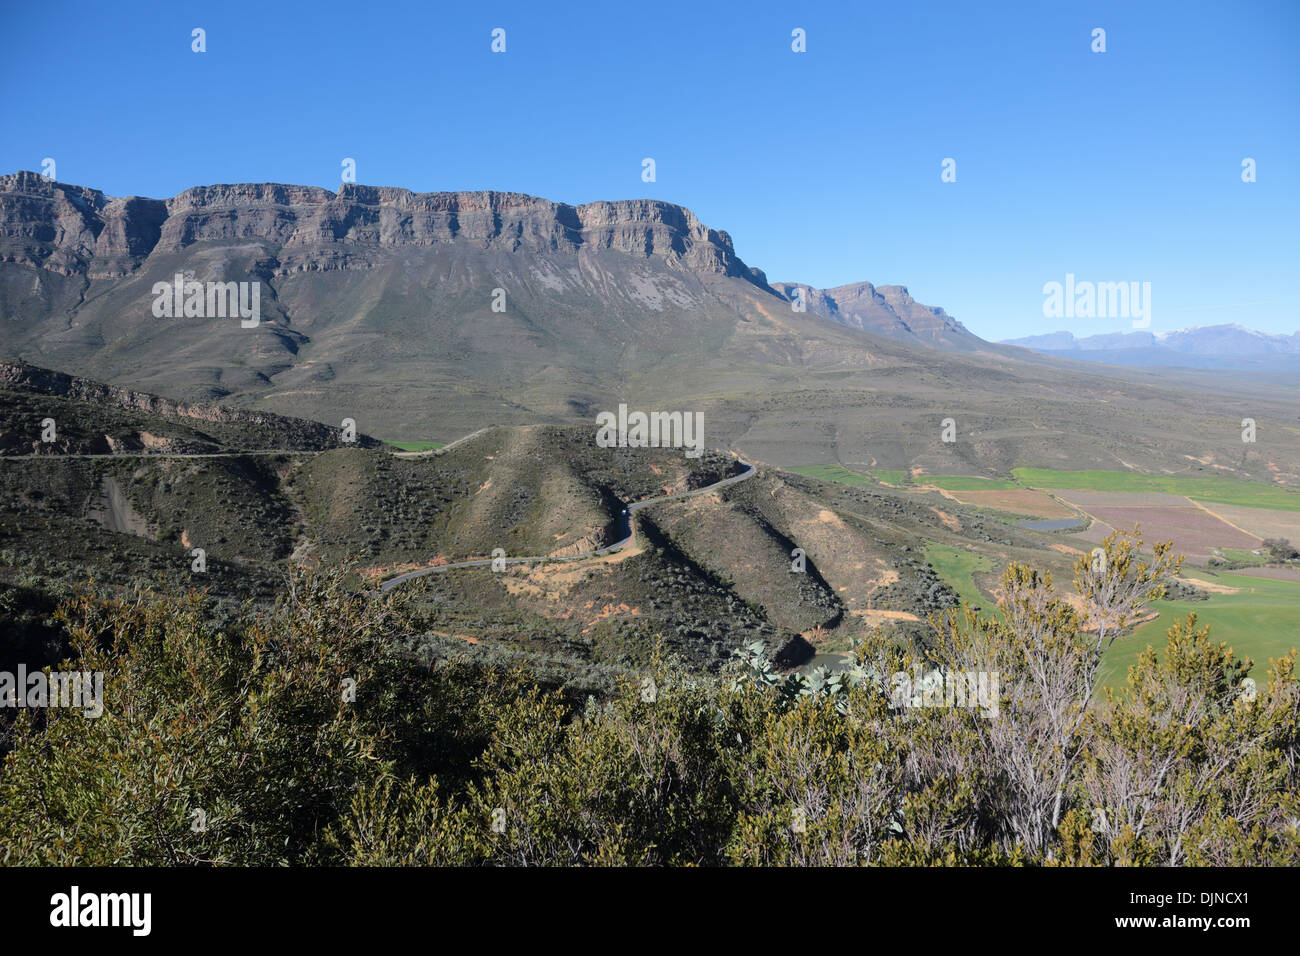 Aerial view of the Koue Bokkeveld mountain, R303 road and surrounding farms, as viewed from the Witzenberg Mountains Stock Photo